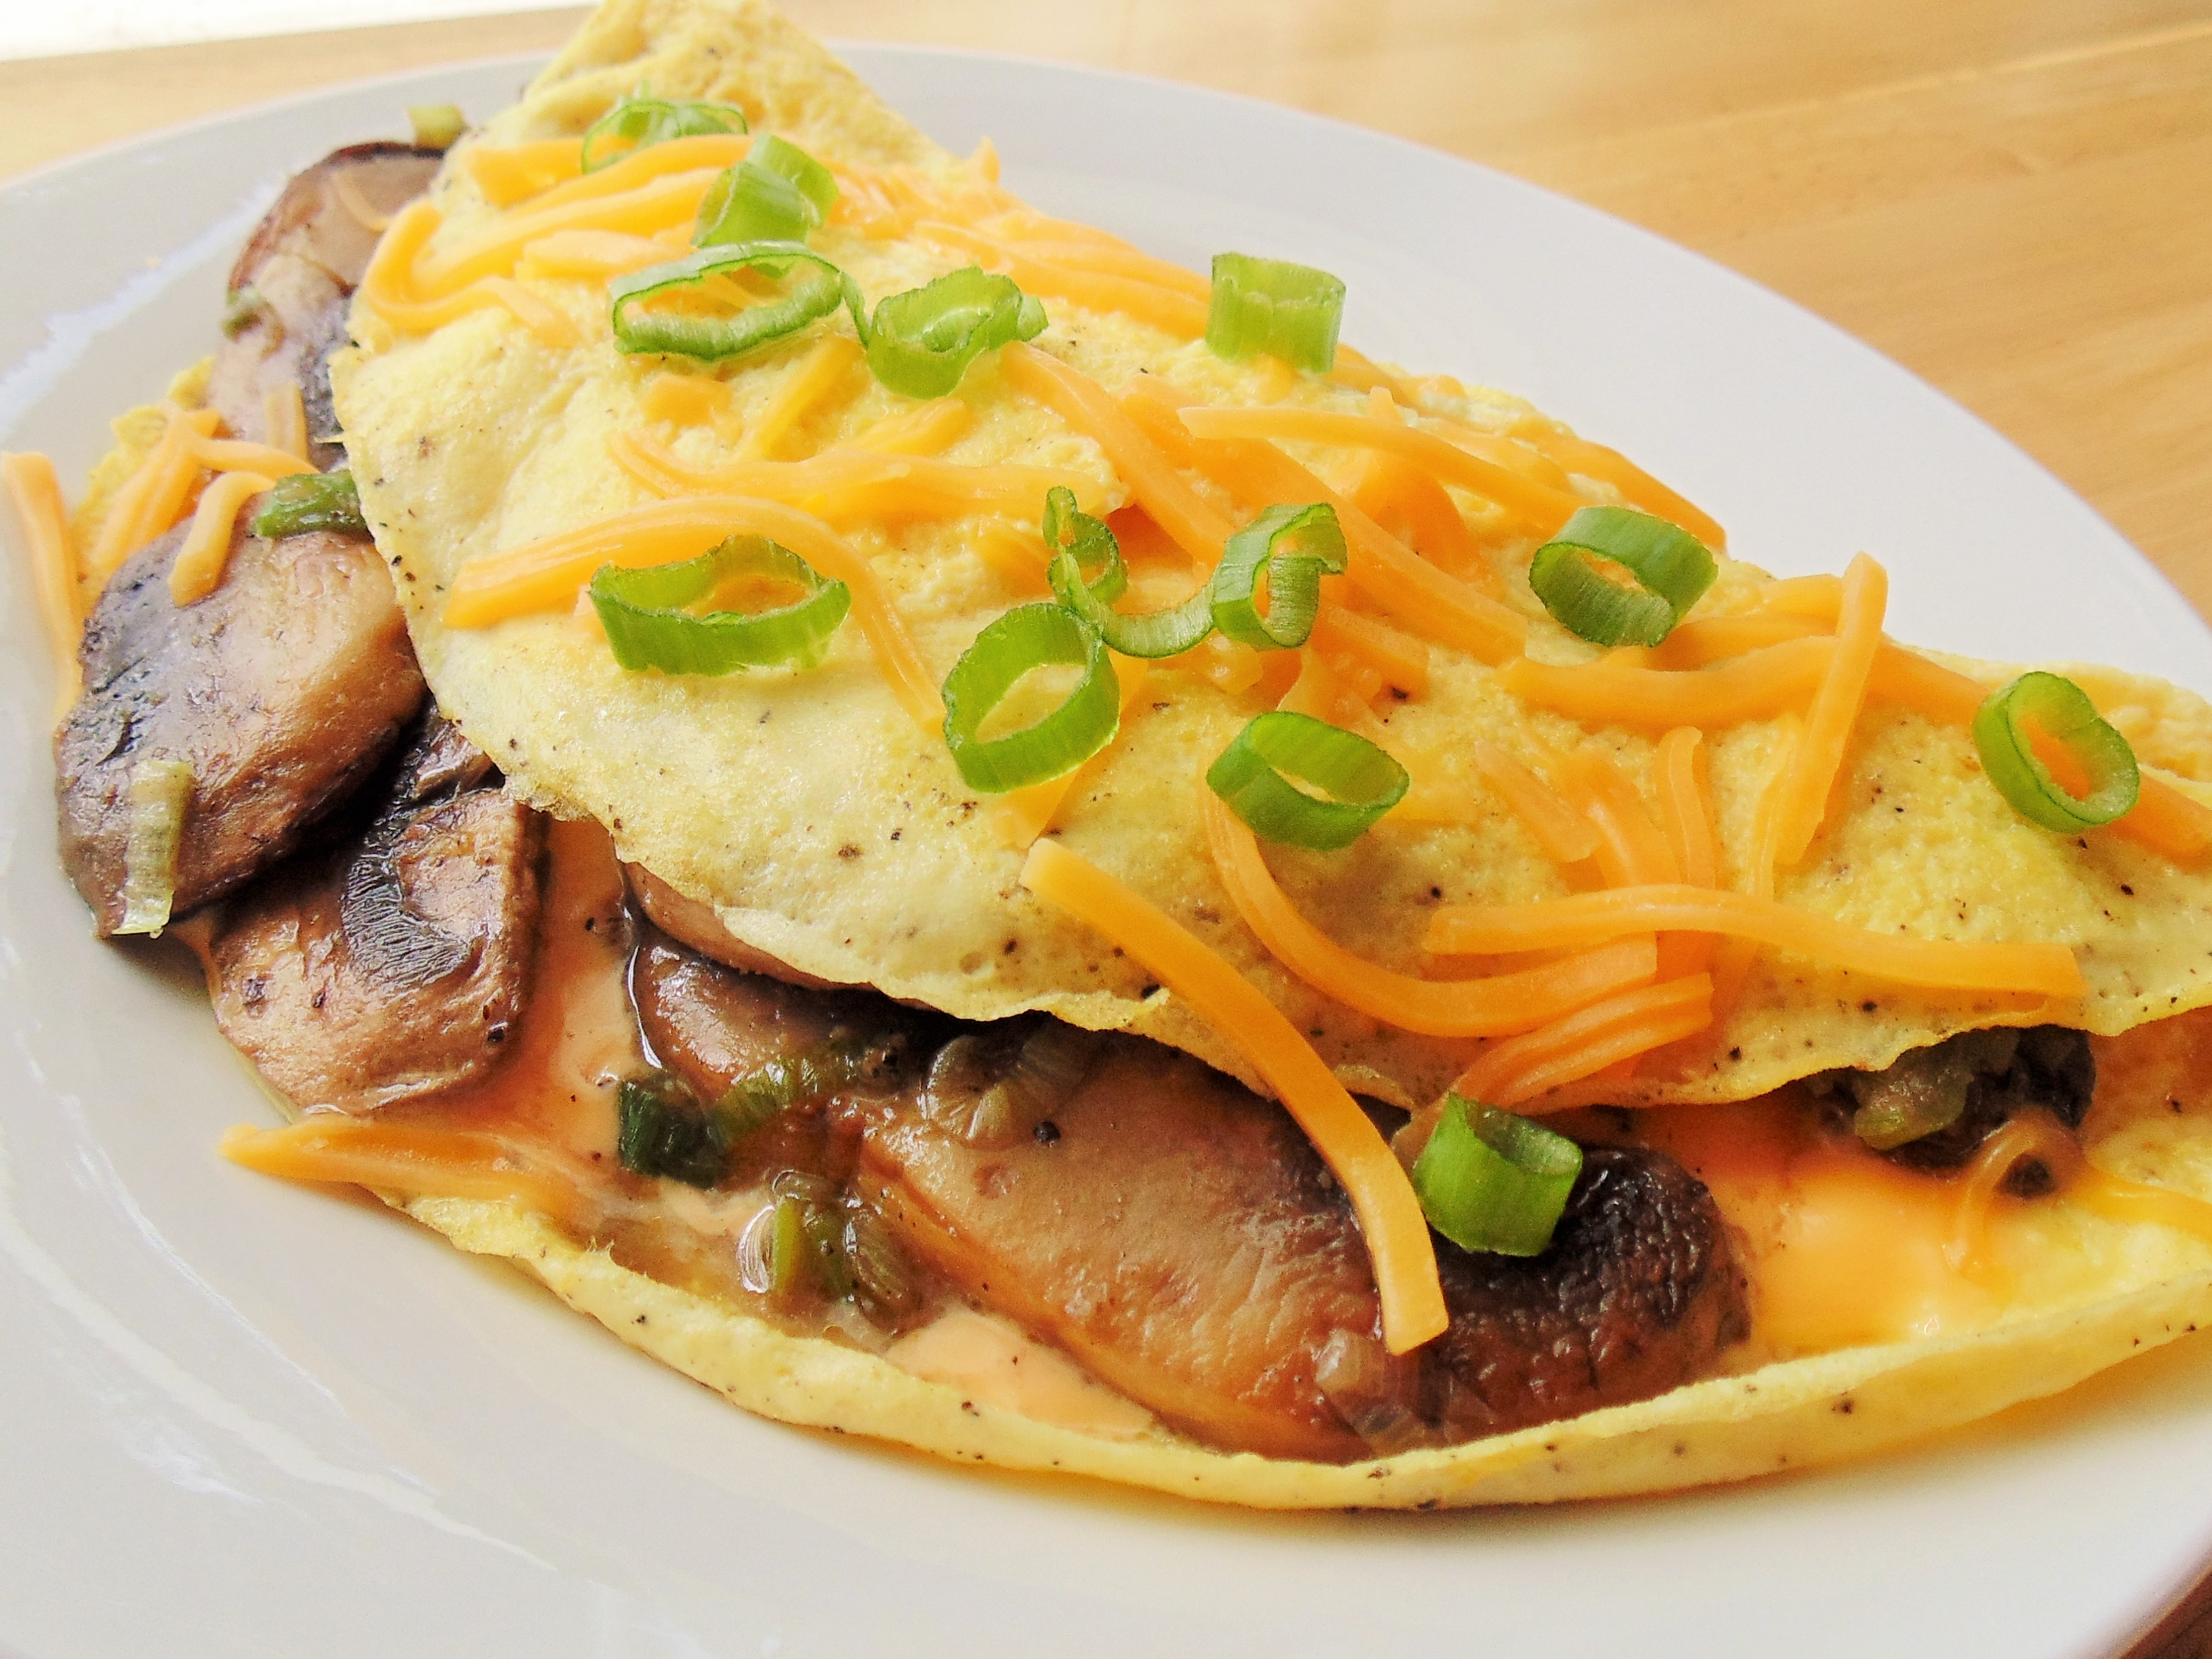 Mushroom, Scallion, and Cheese Omelet